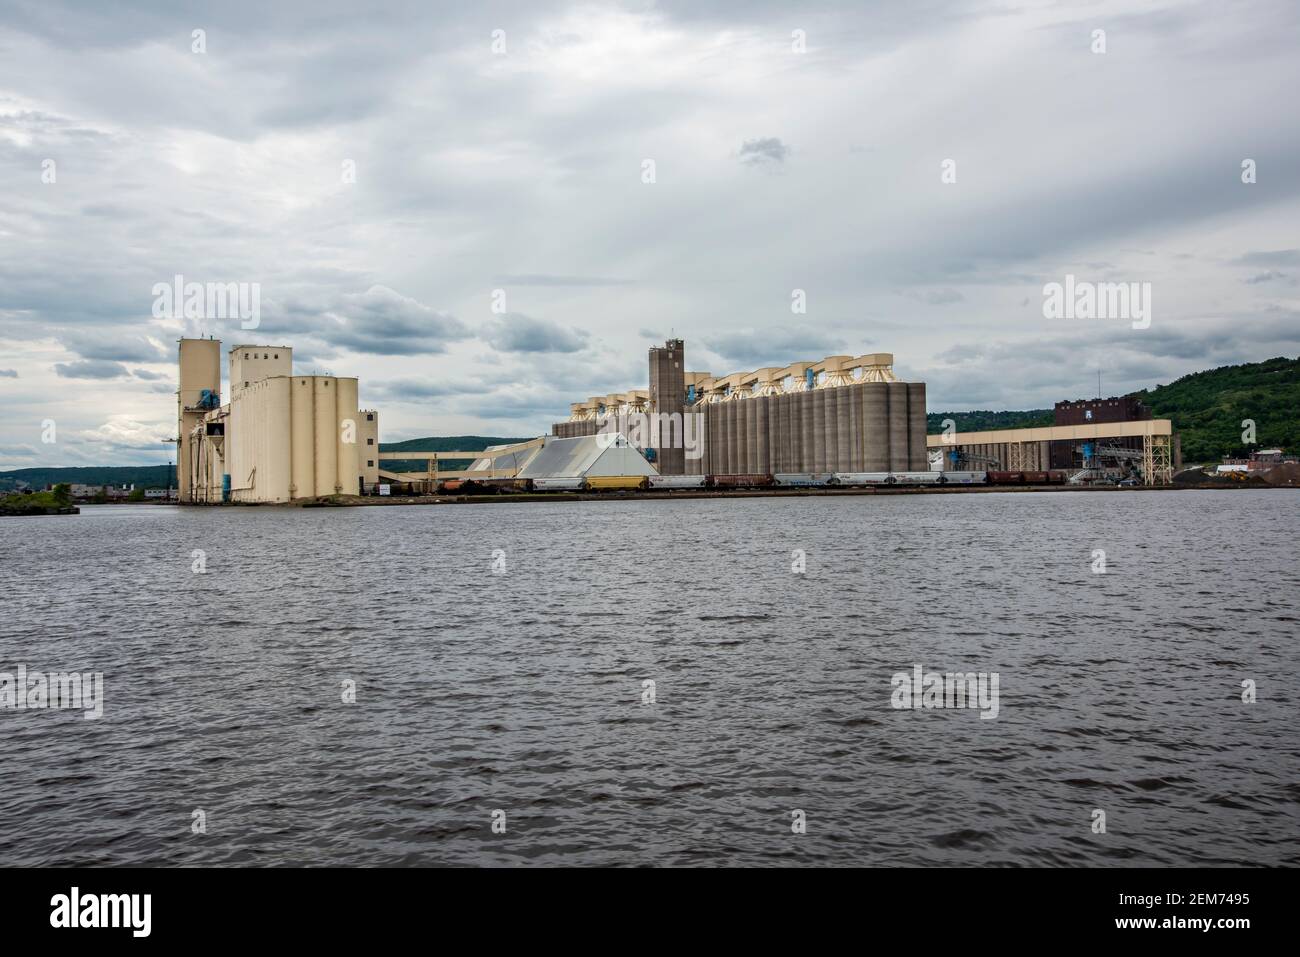 Duluth, Minnesota. This WB storage facility on Lake Superior can hold 12 million bushels of grain in its elevators for export. Stock Photo